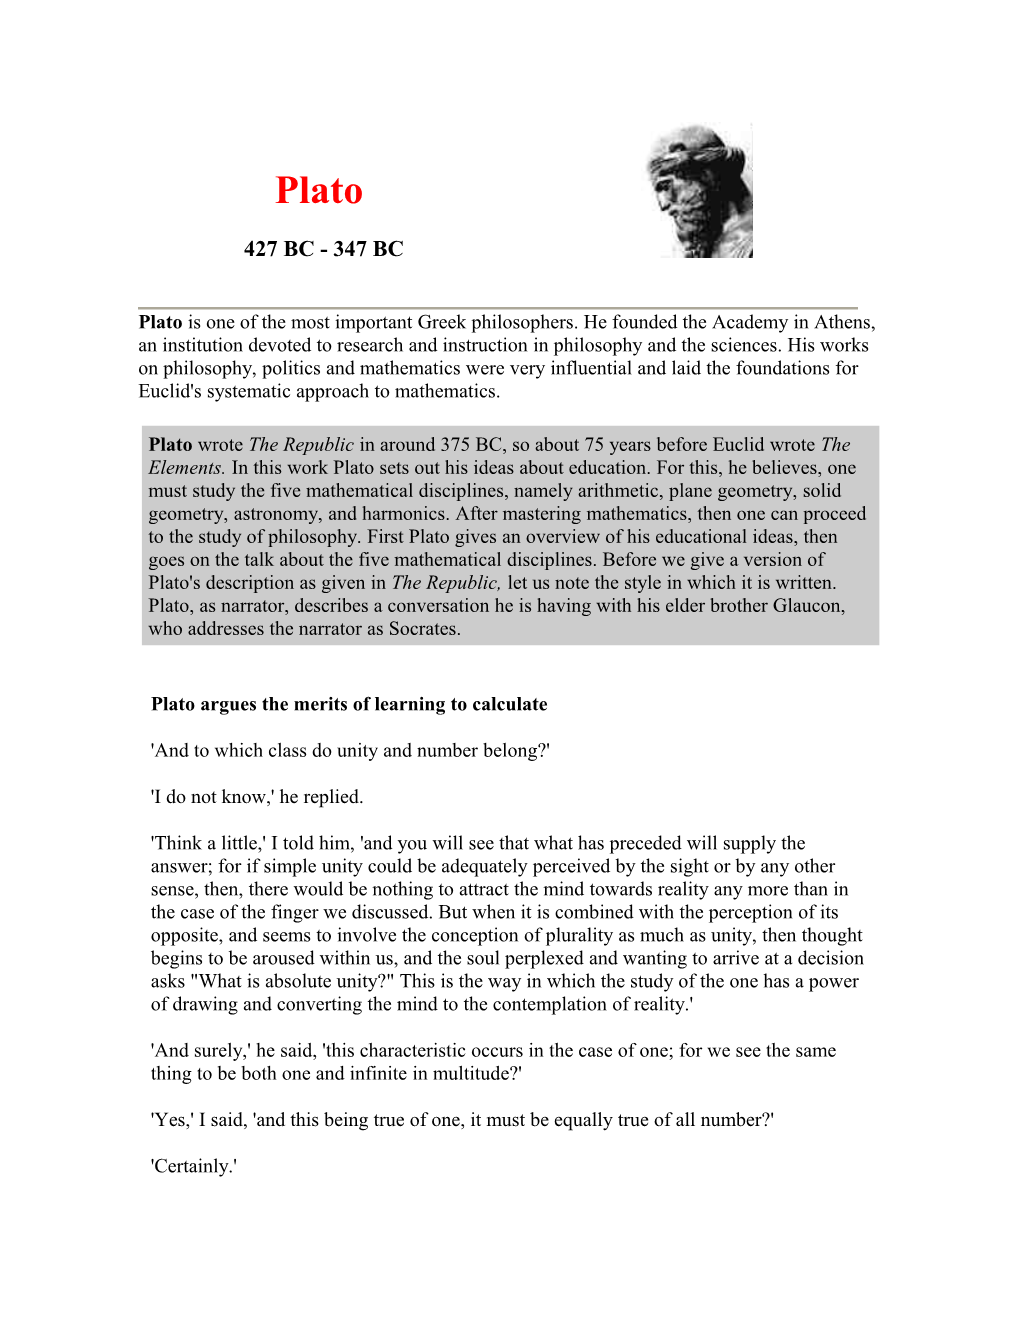 Plato Argues the Merits of Learning to Calculate